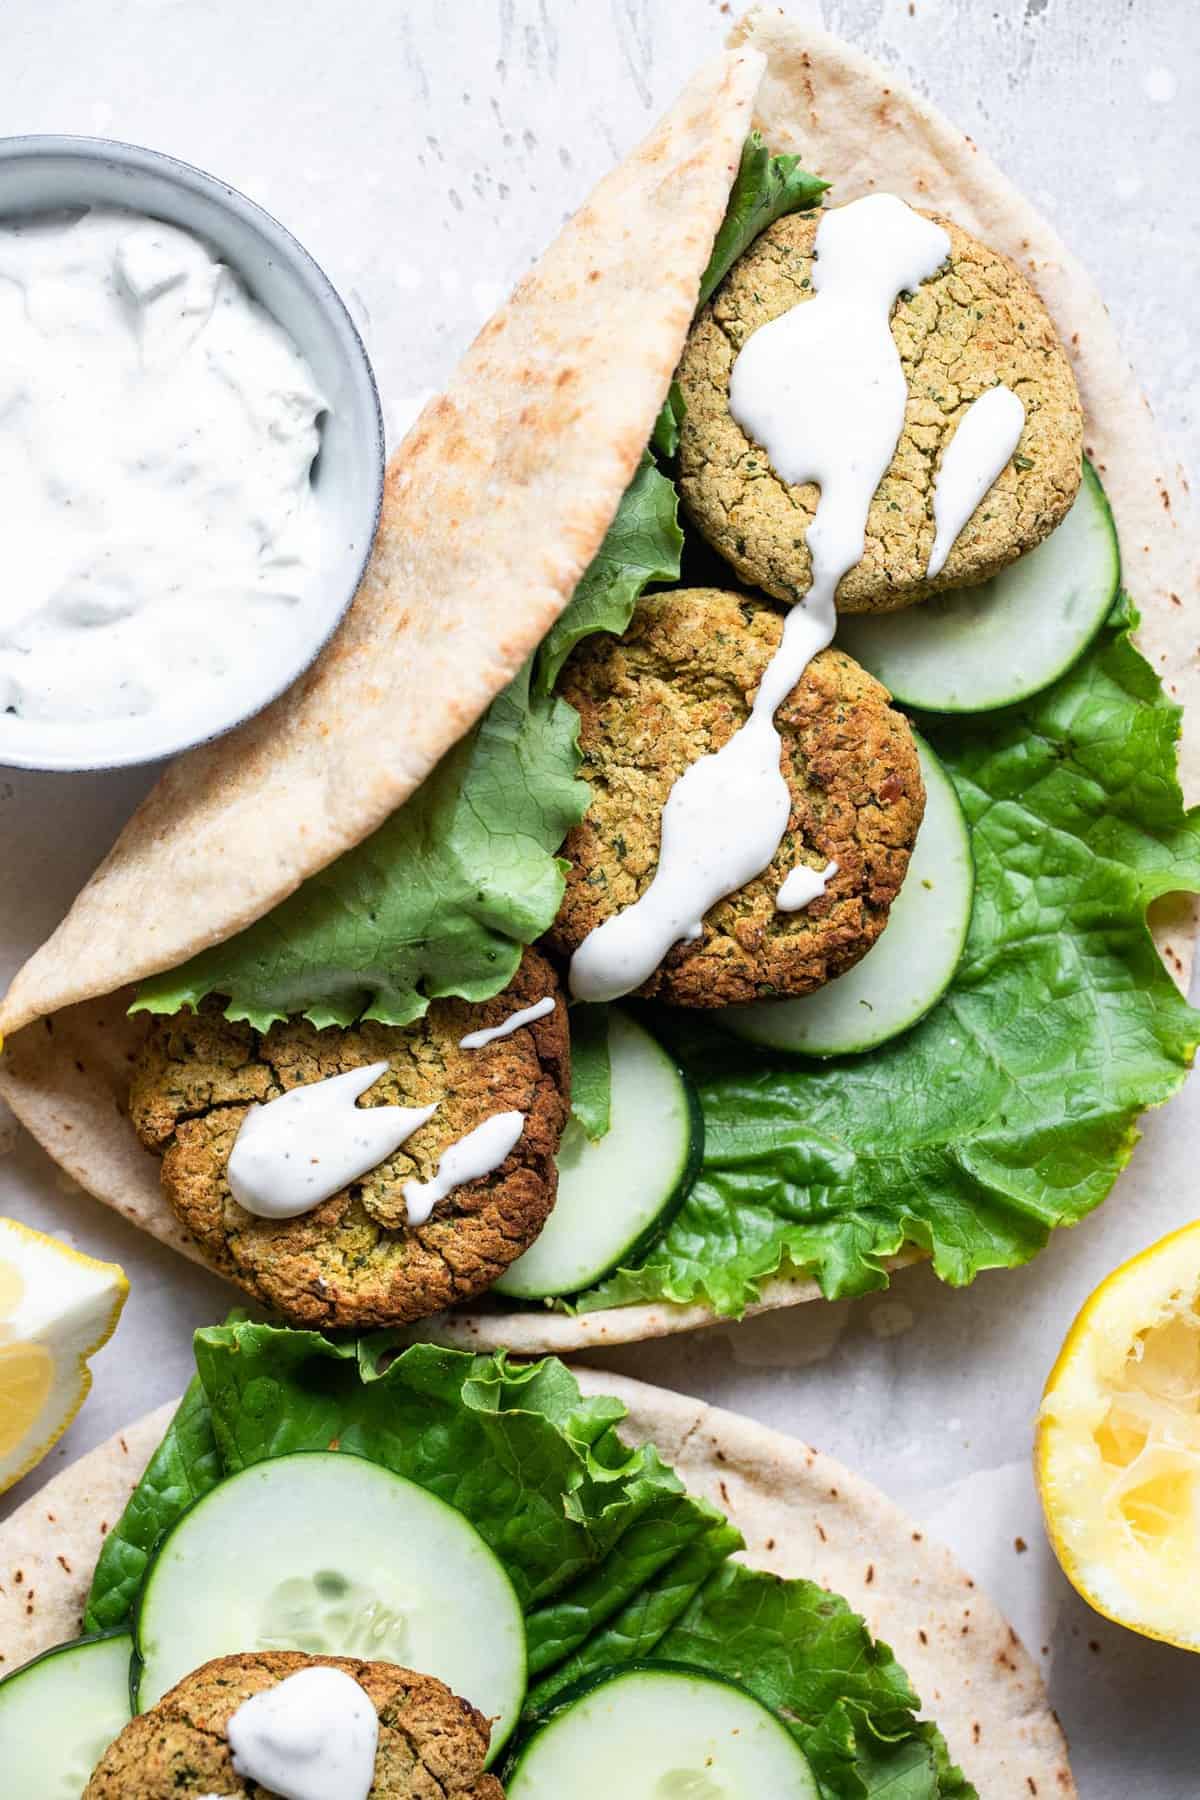 baked falafel in a pita bread with yogurt sauce